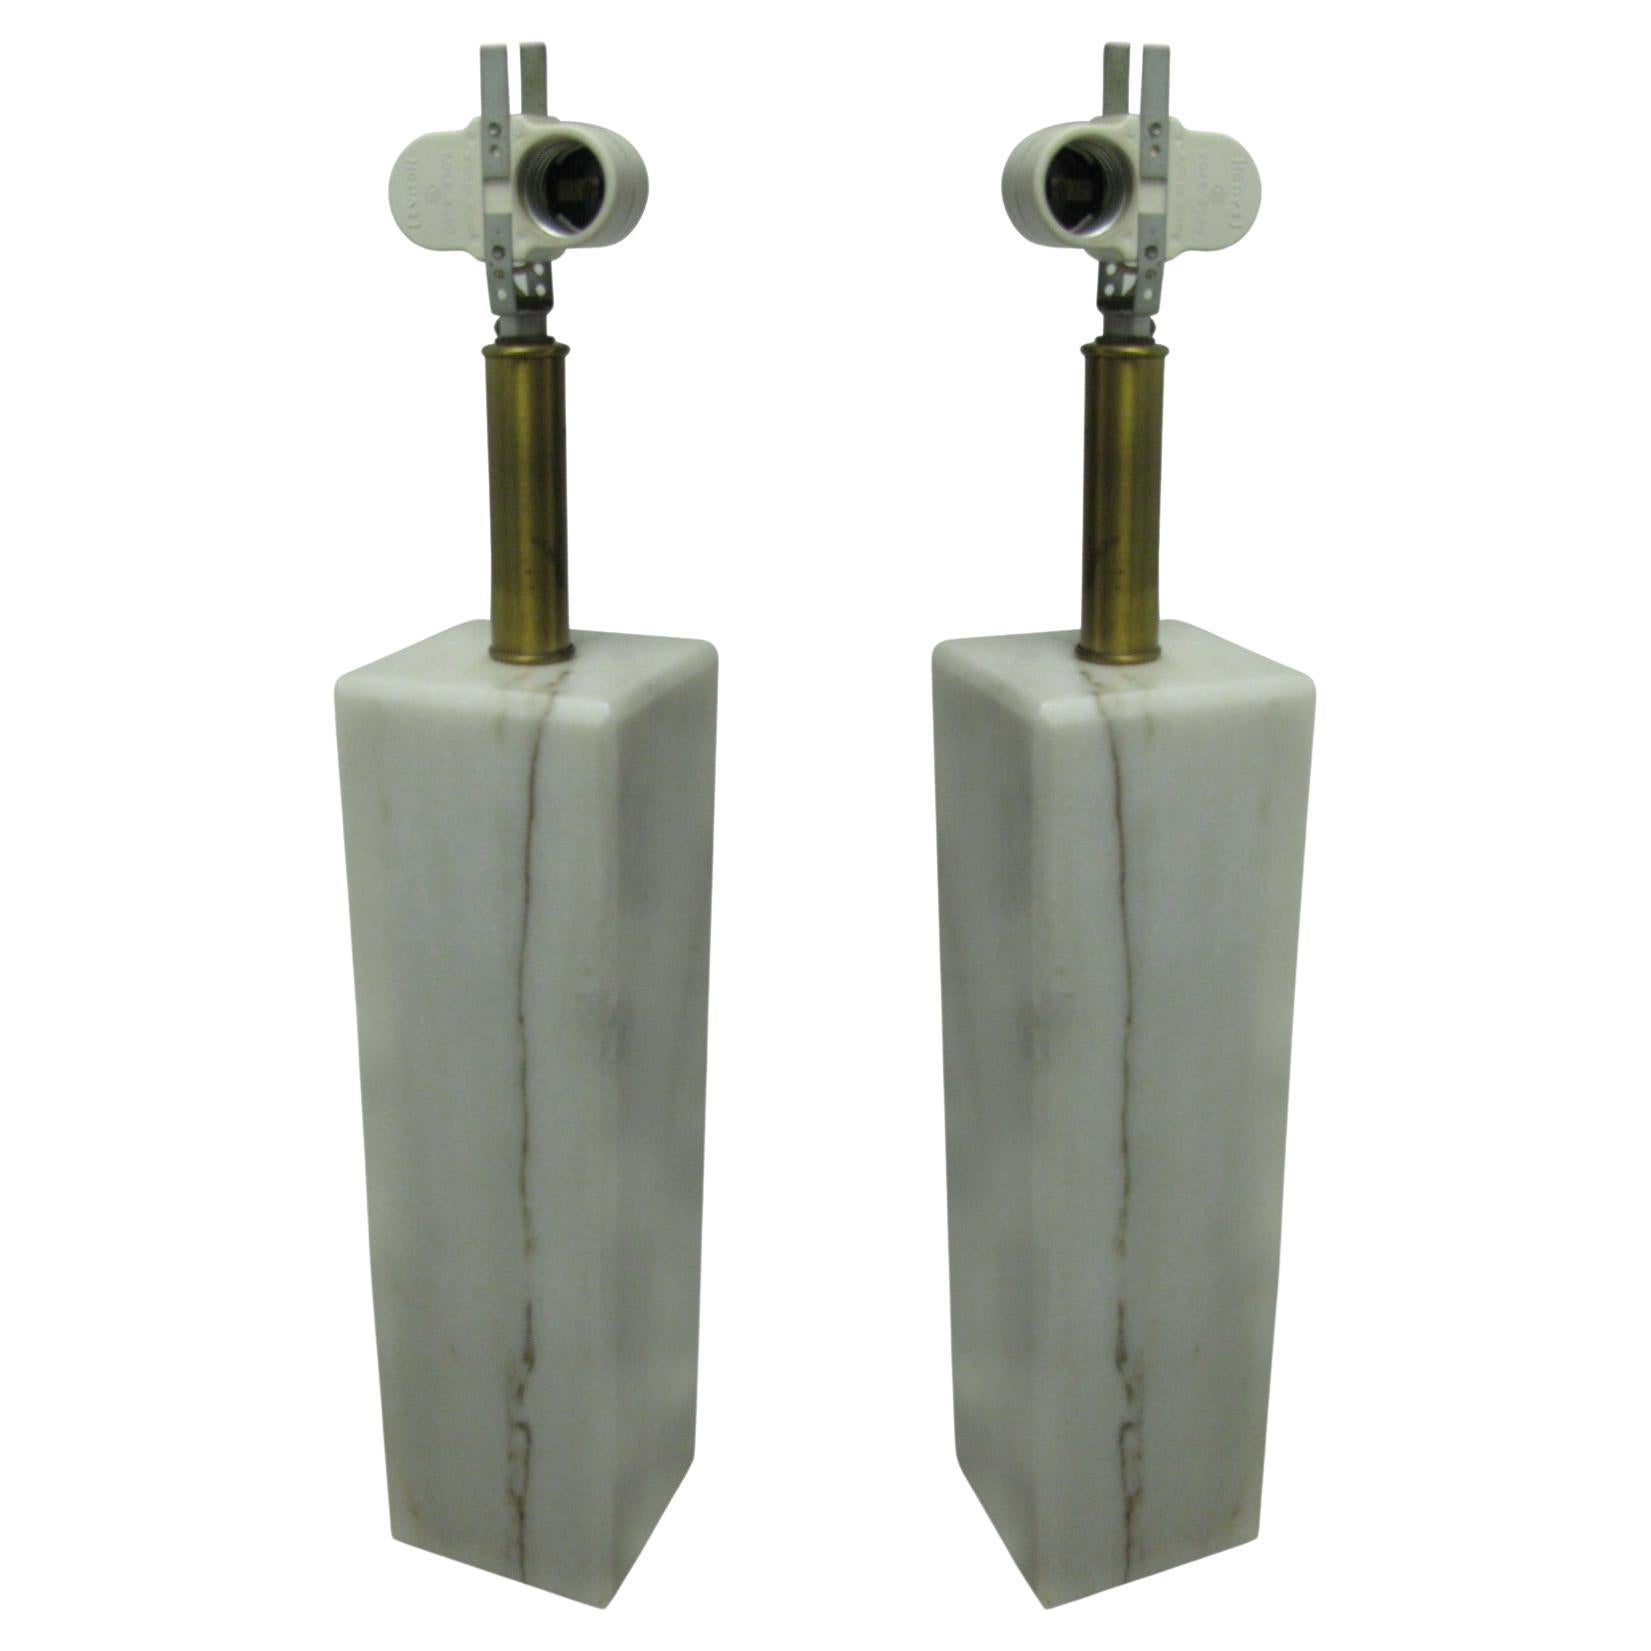 Pair of Italian Polished Marble Table Lamps, Von Neesen